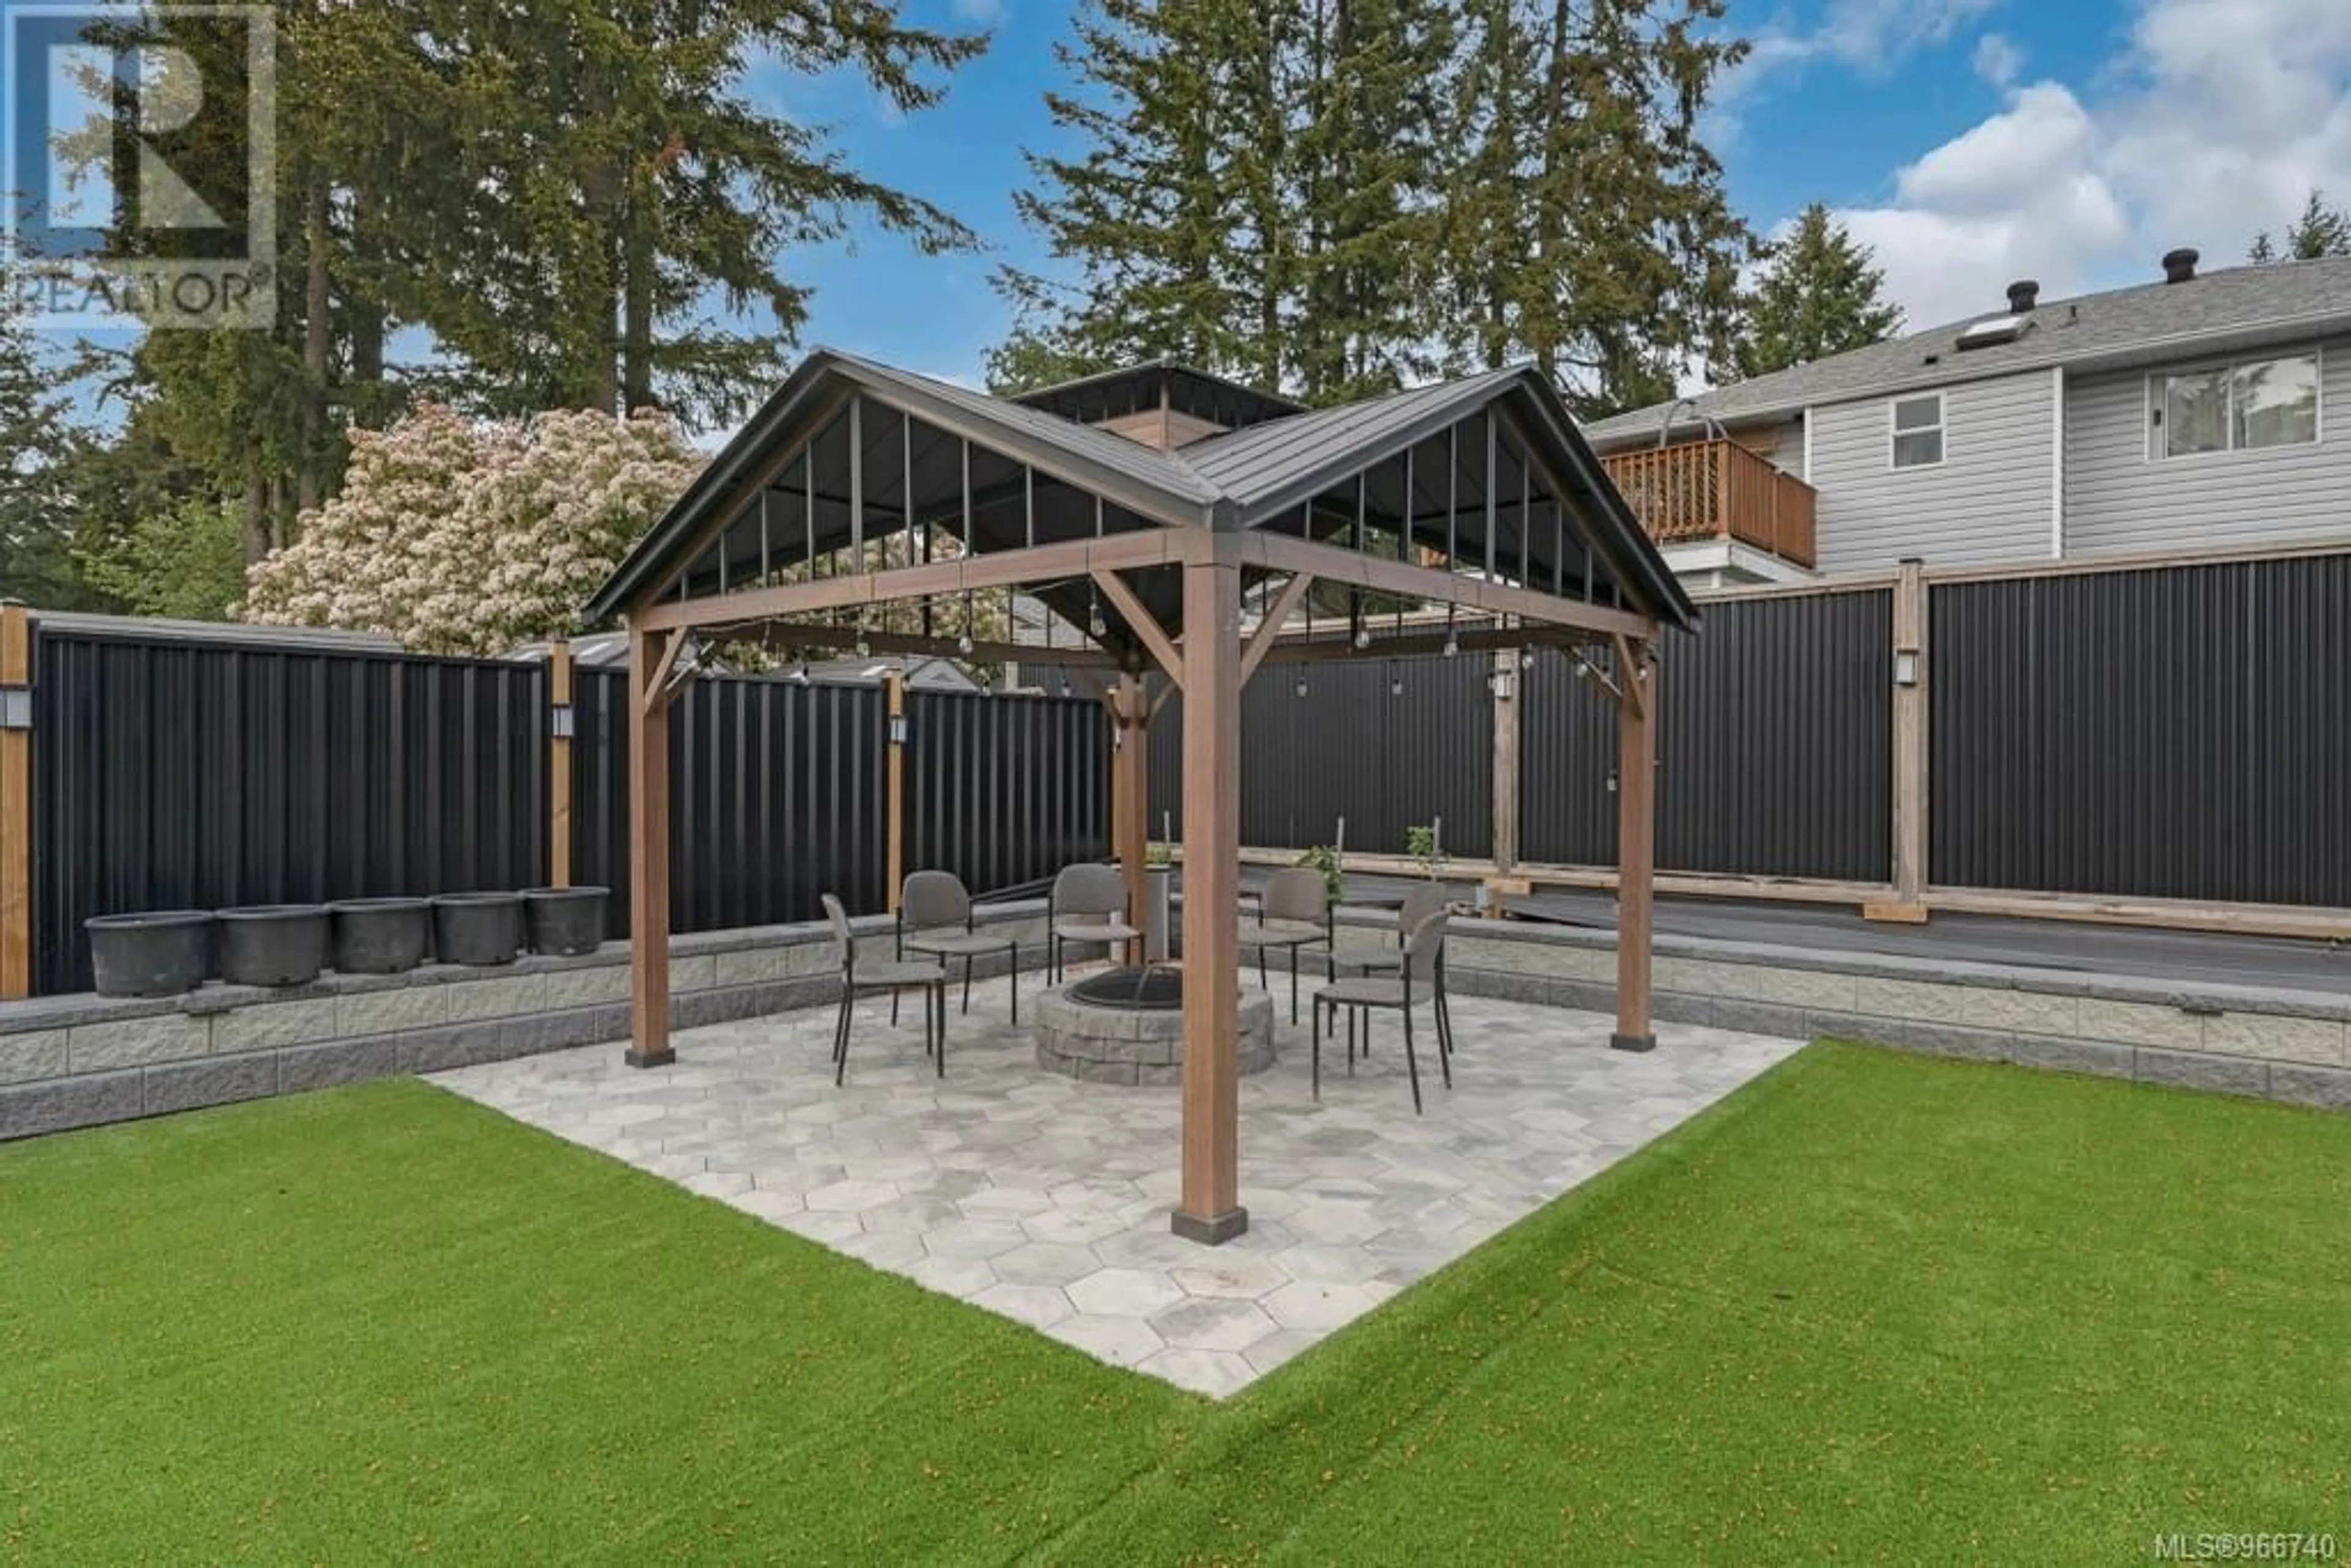 Patio for 4168 Uplands Dr, Nanaimo British Columbia V9T5K5